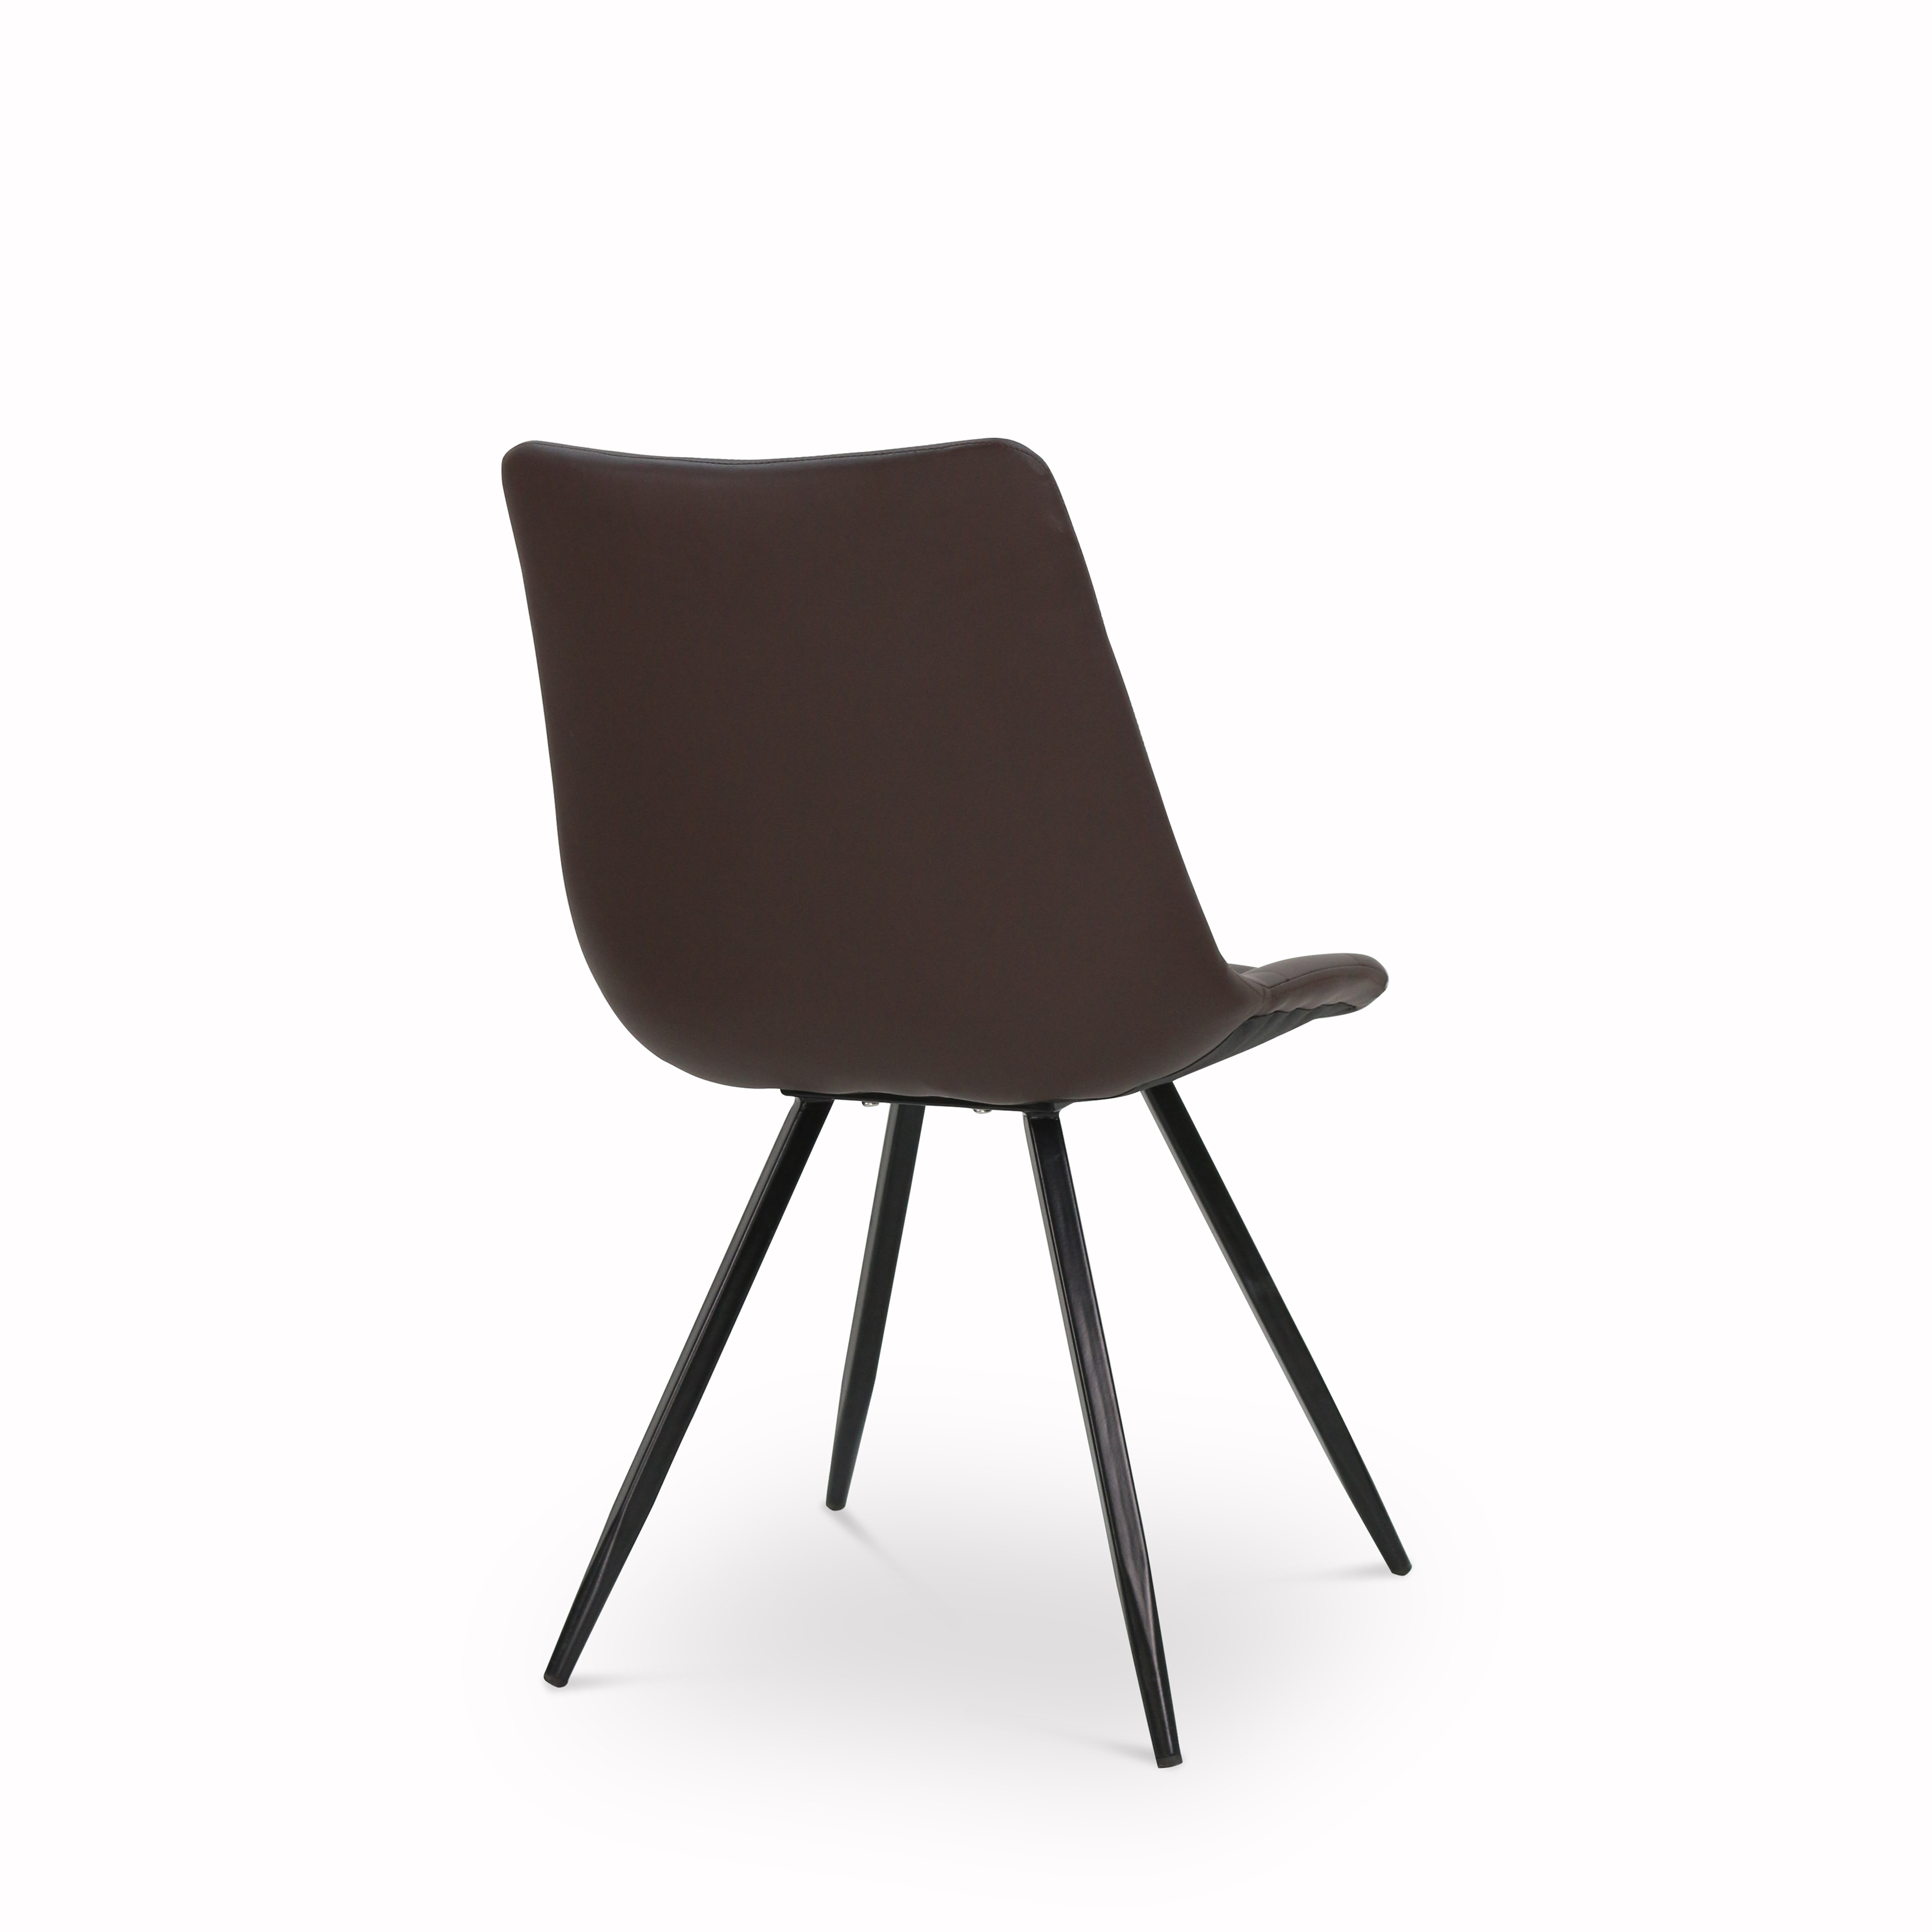 PU Metal Leg Living Chair for dining room or living room